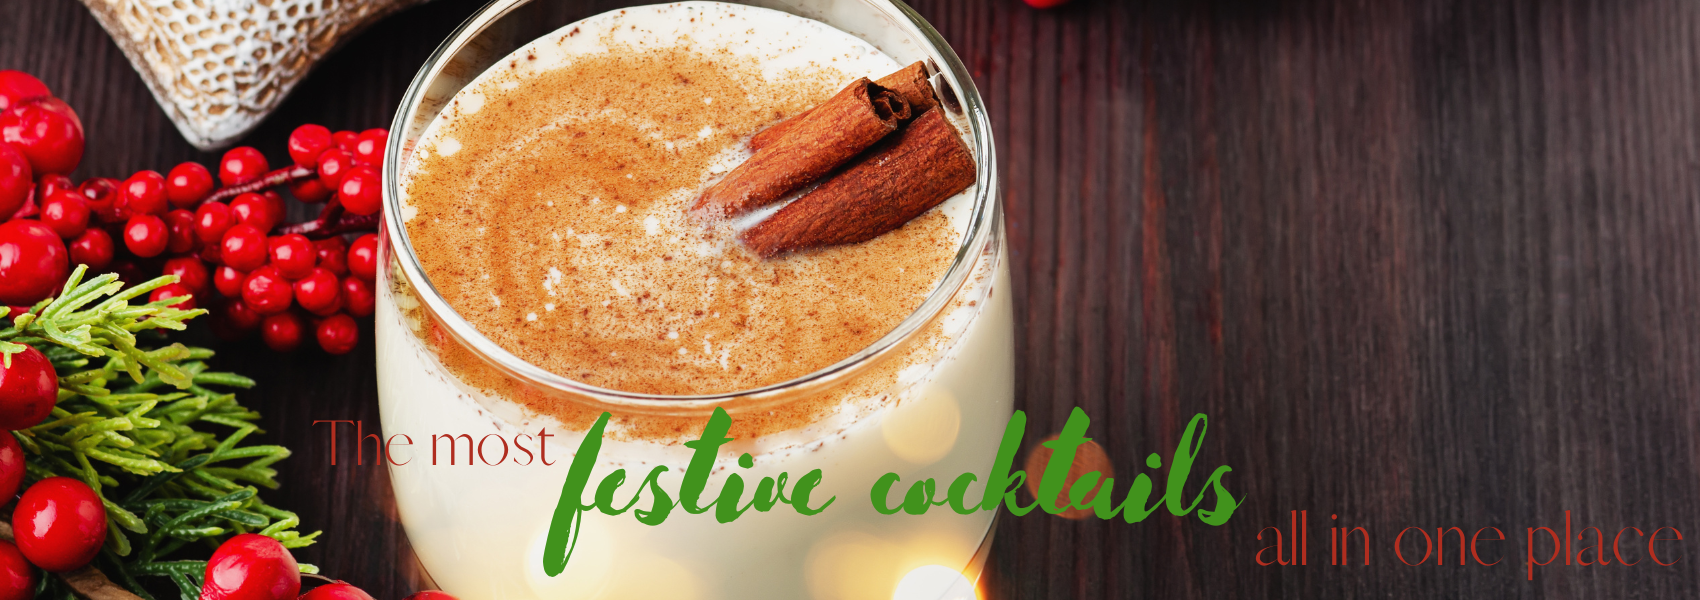 the most festive cocktails